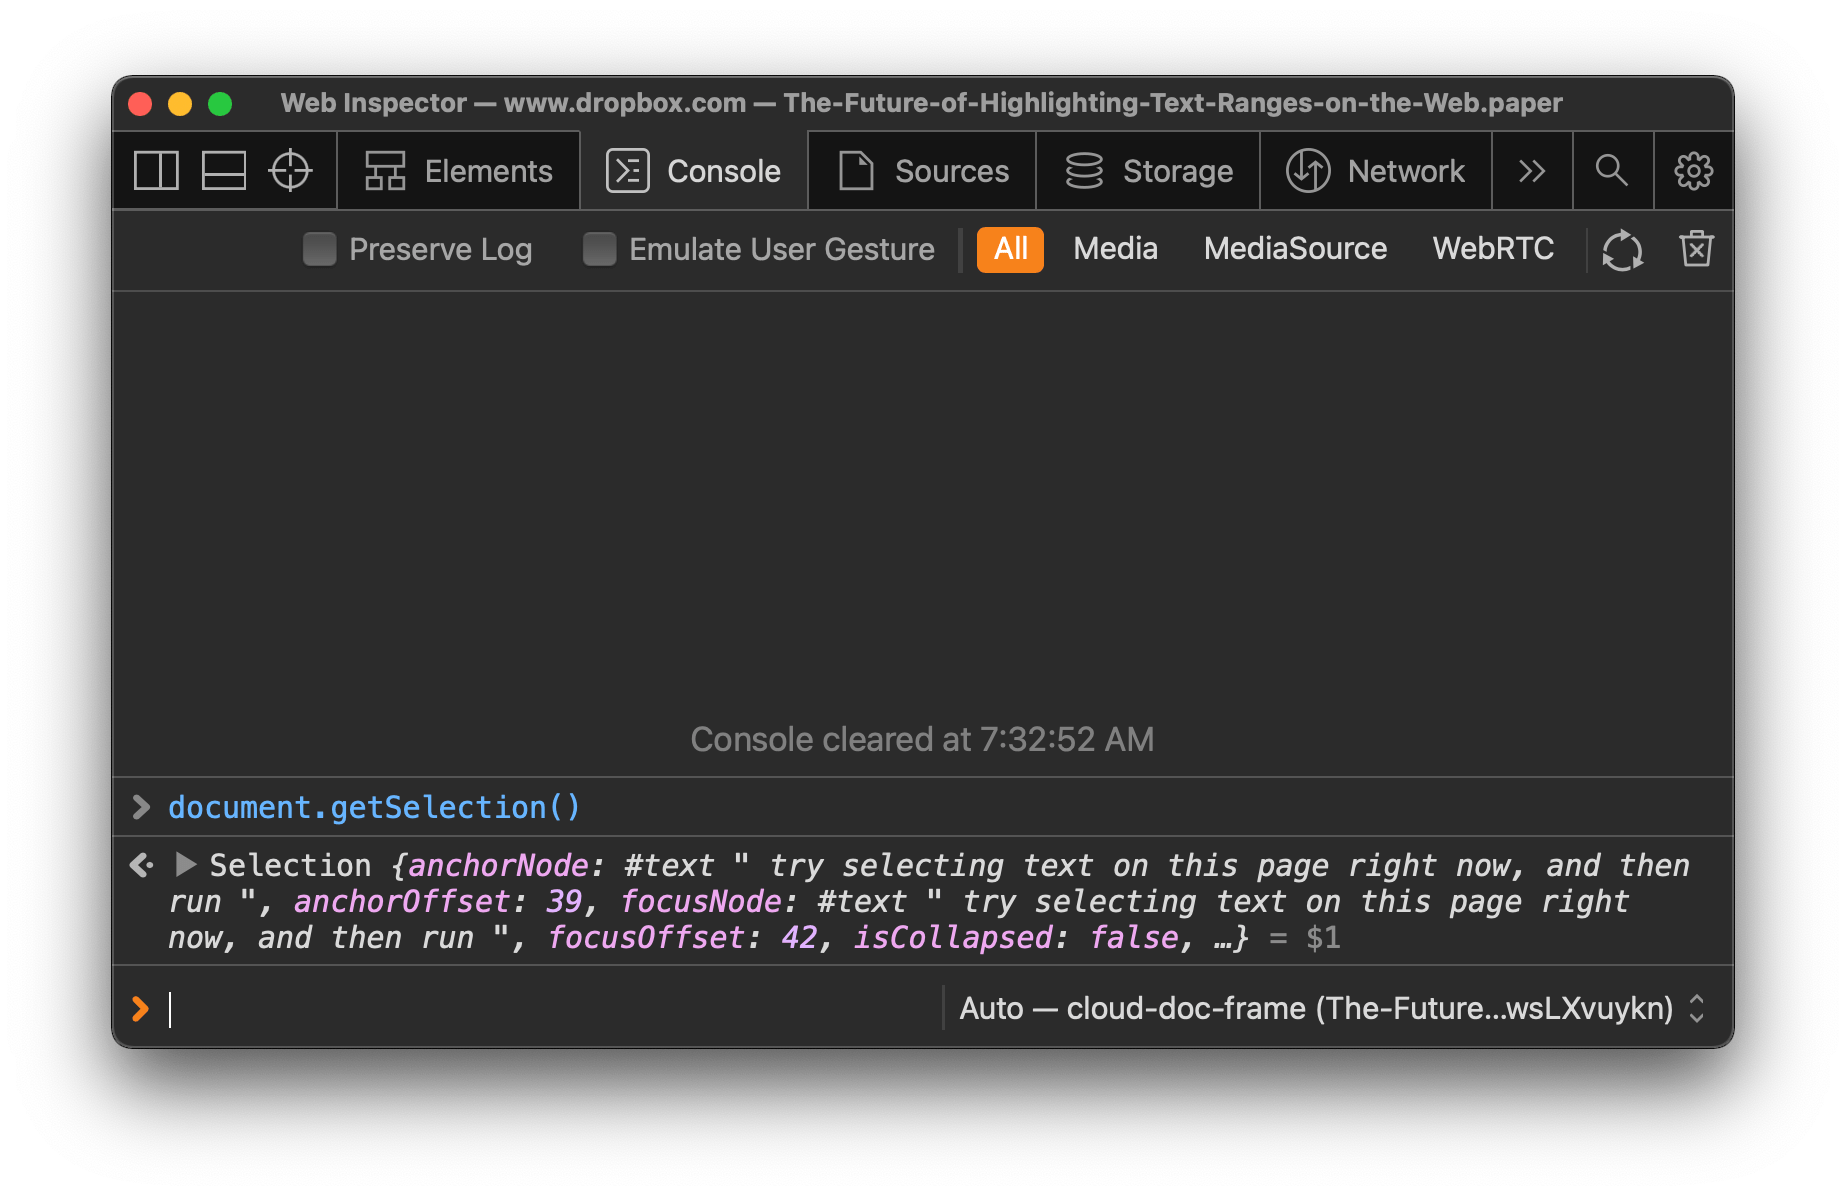 DevTools window showing the position of the current selection in the console.